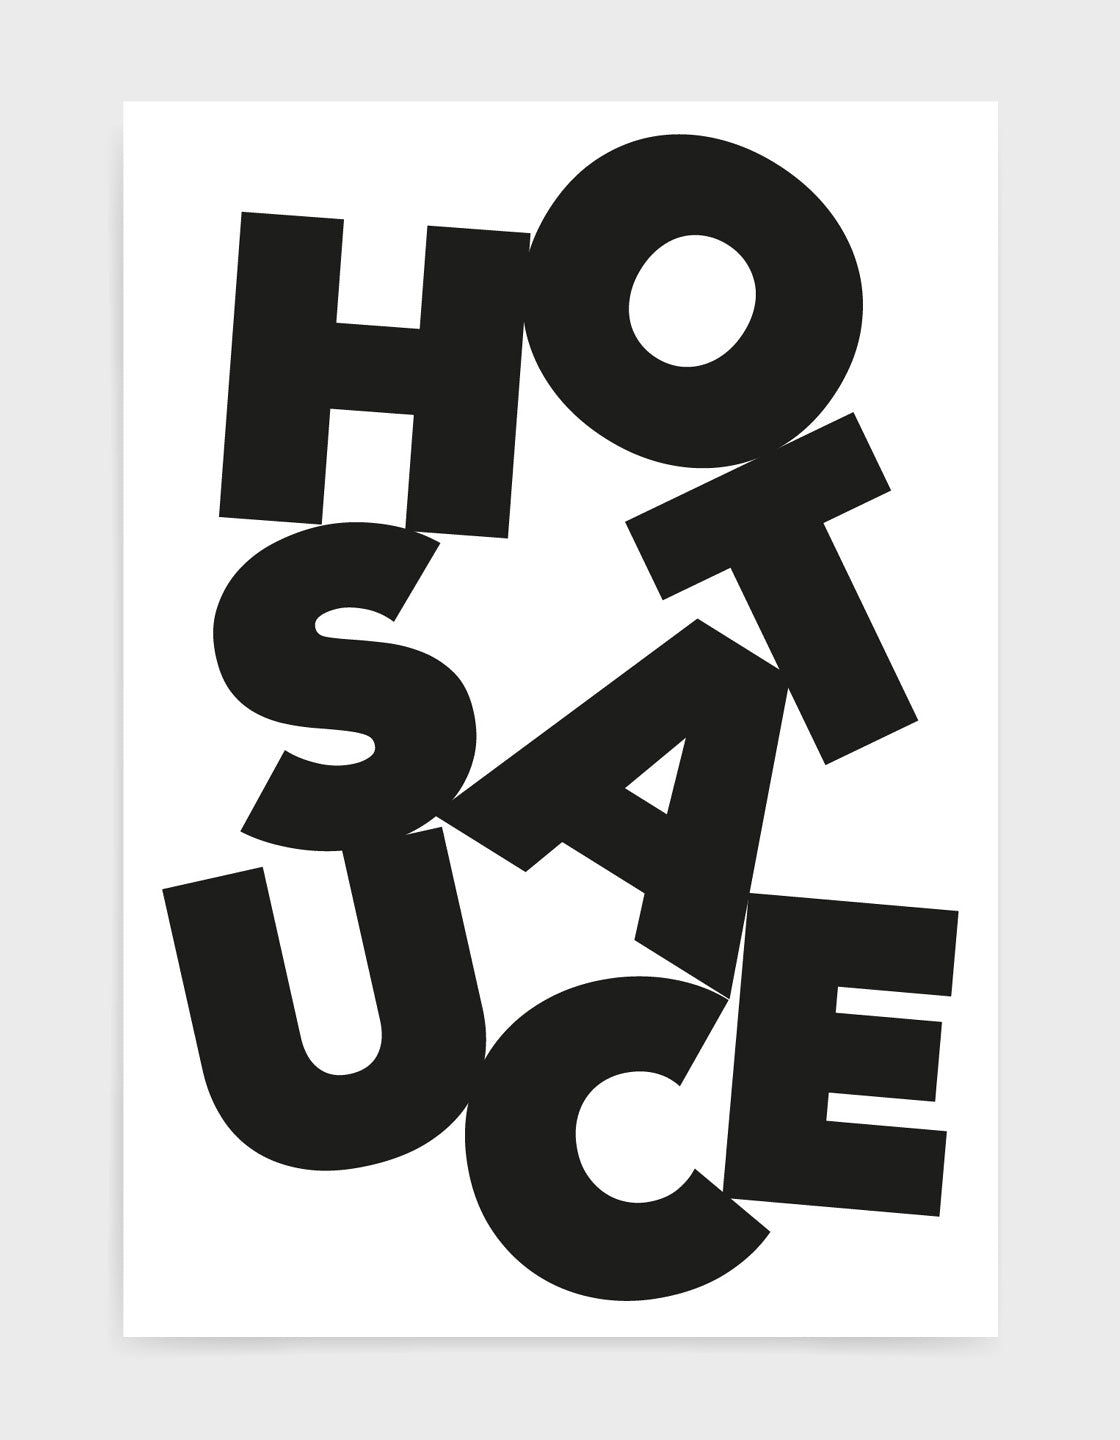 typography art print of the word hot sauce in black text against a white background